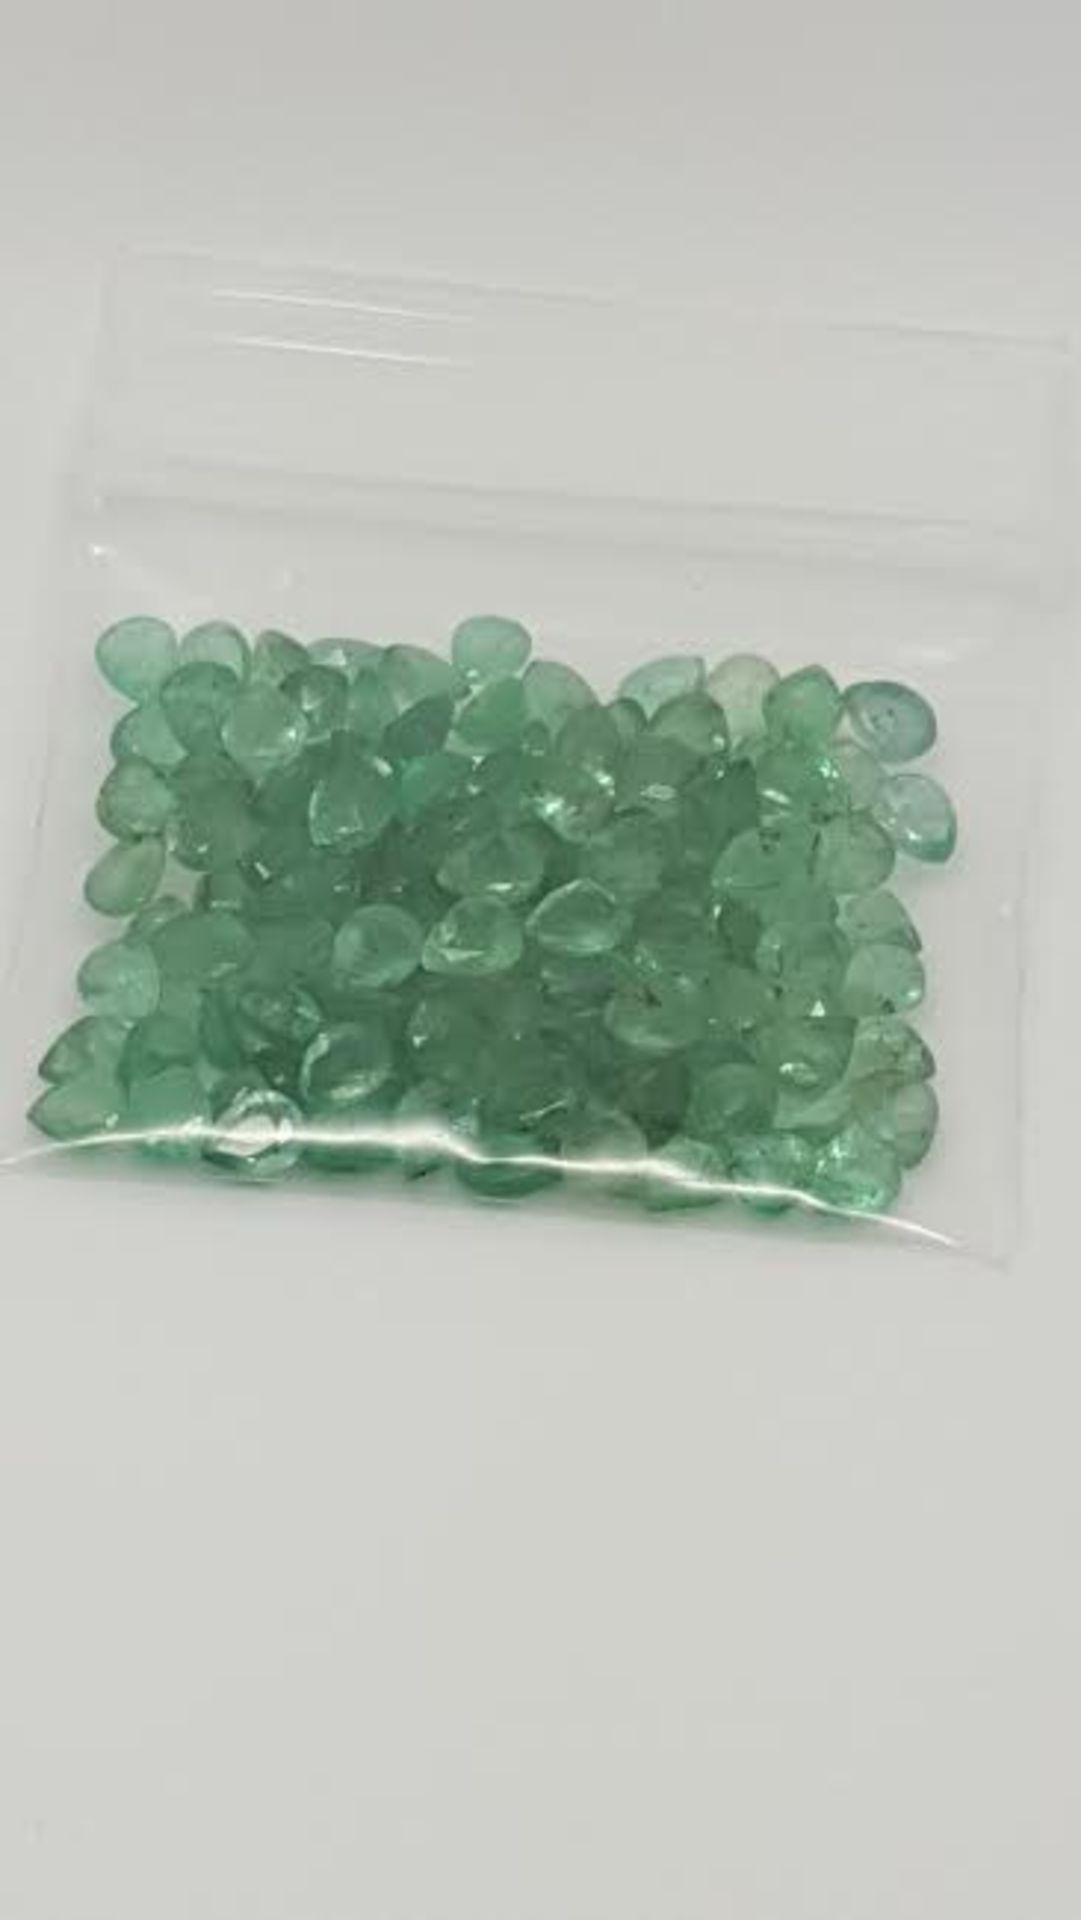 11.63 ct natural loose unheated emeralds